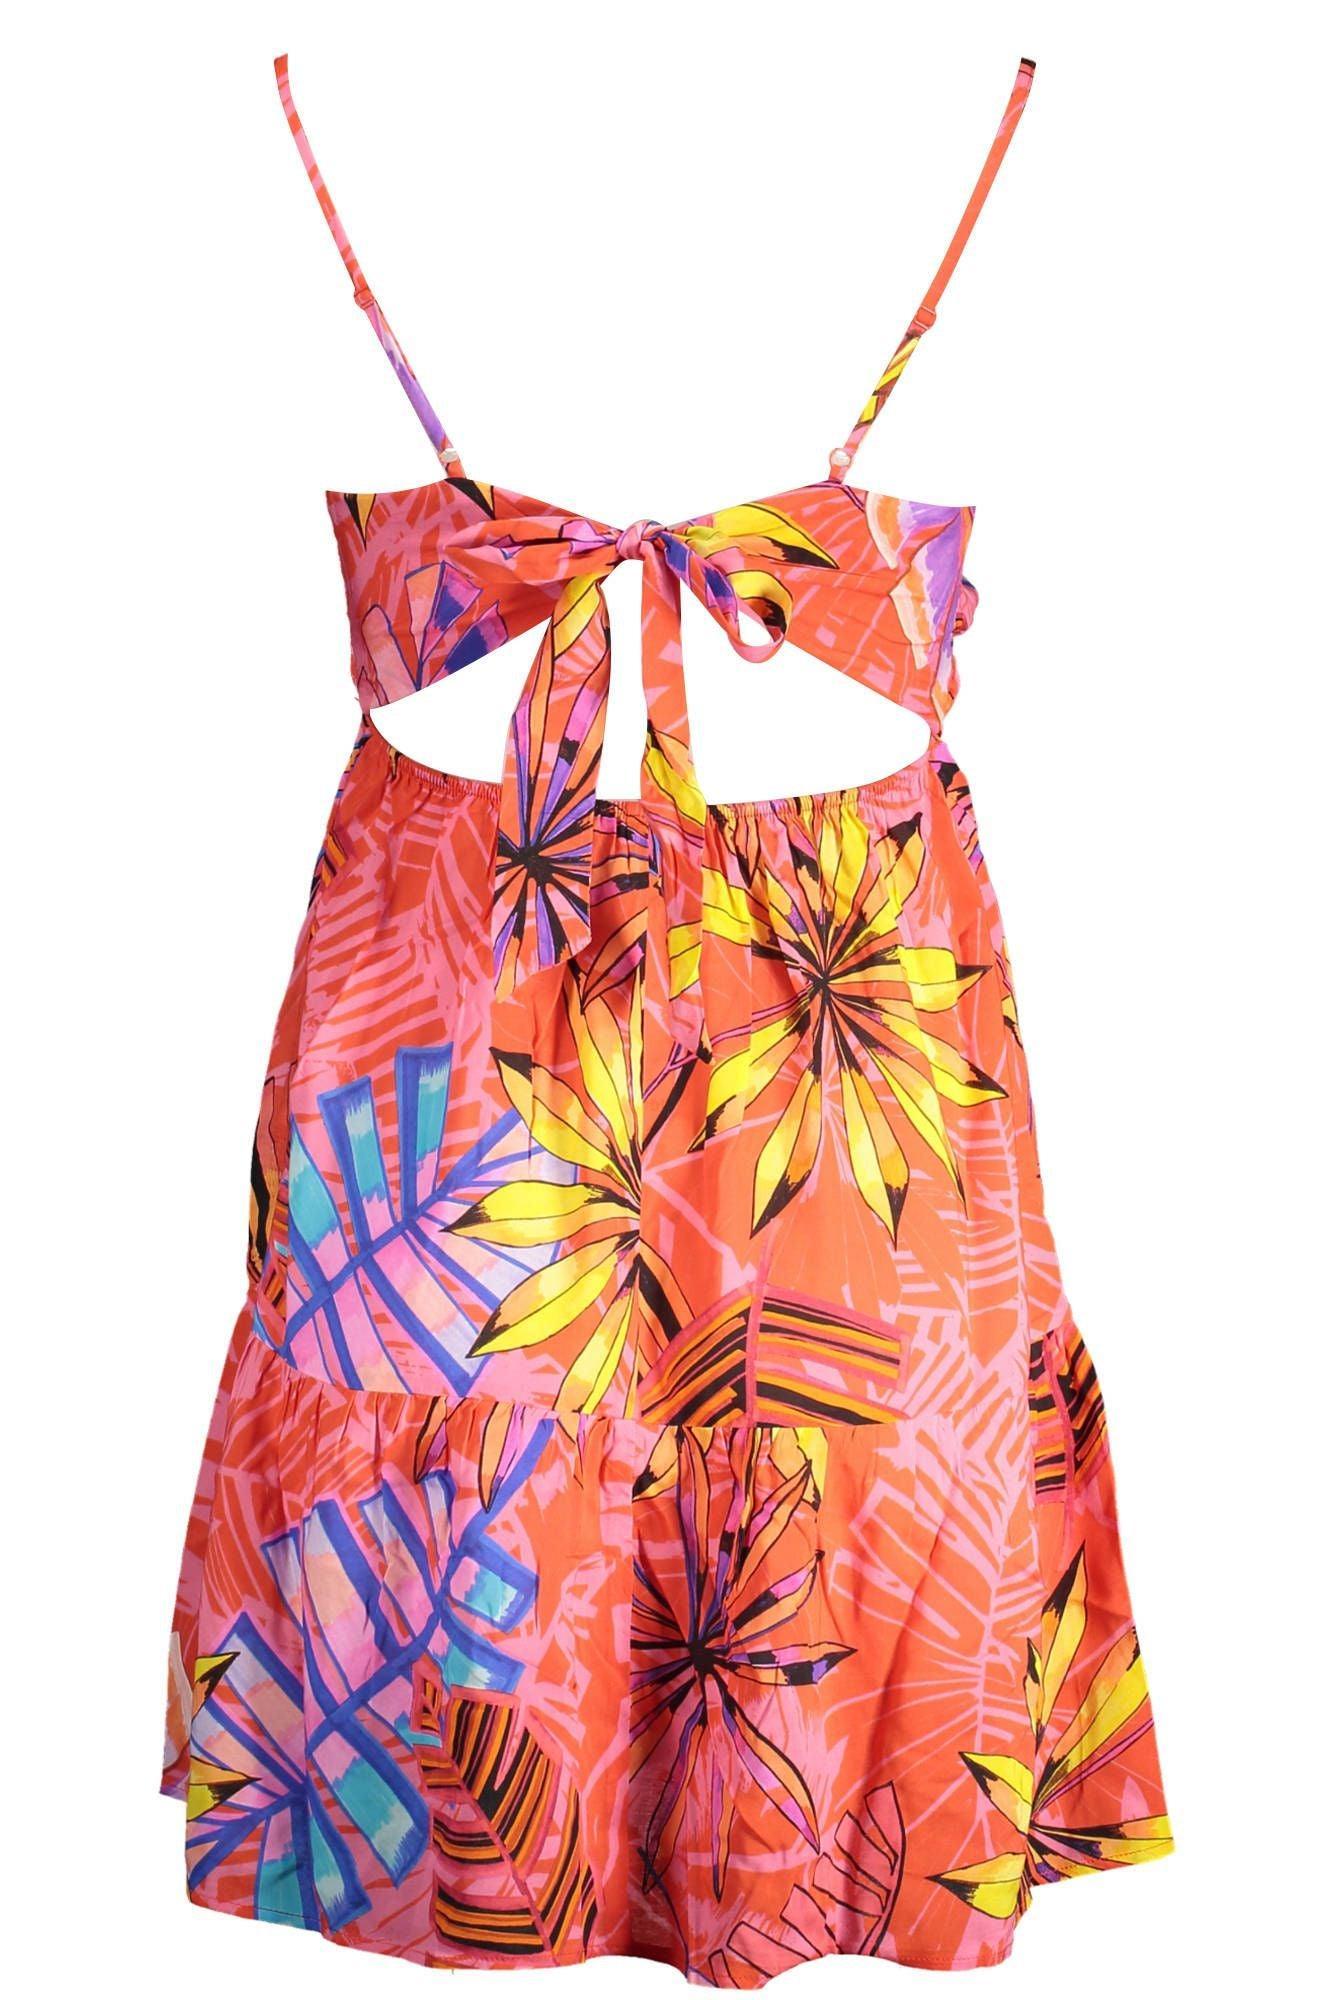 Desigual Radiant Pink Summer Dress with Delicate Details - PER.FASHION